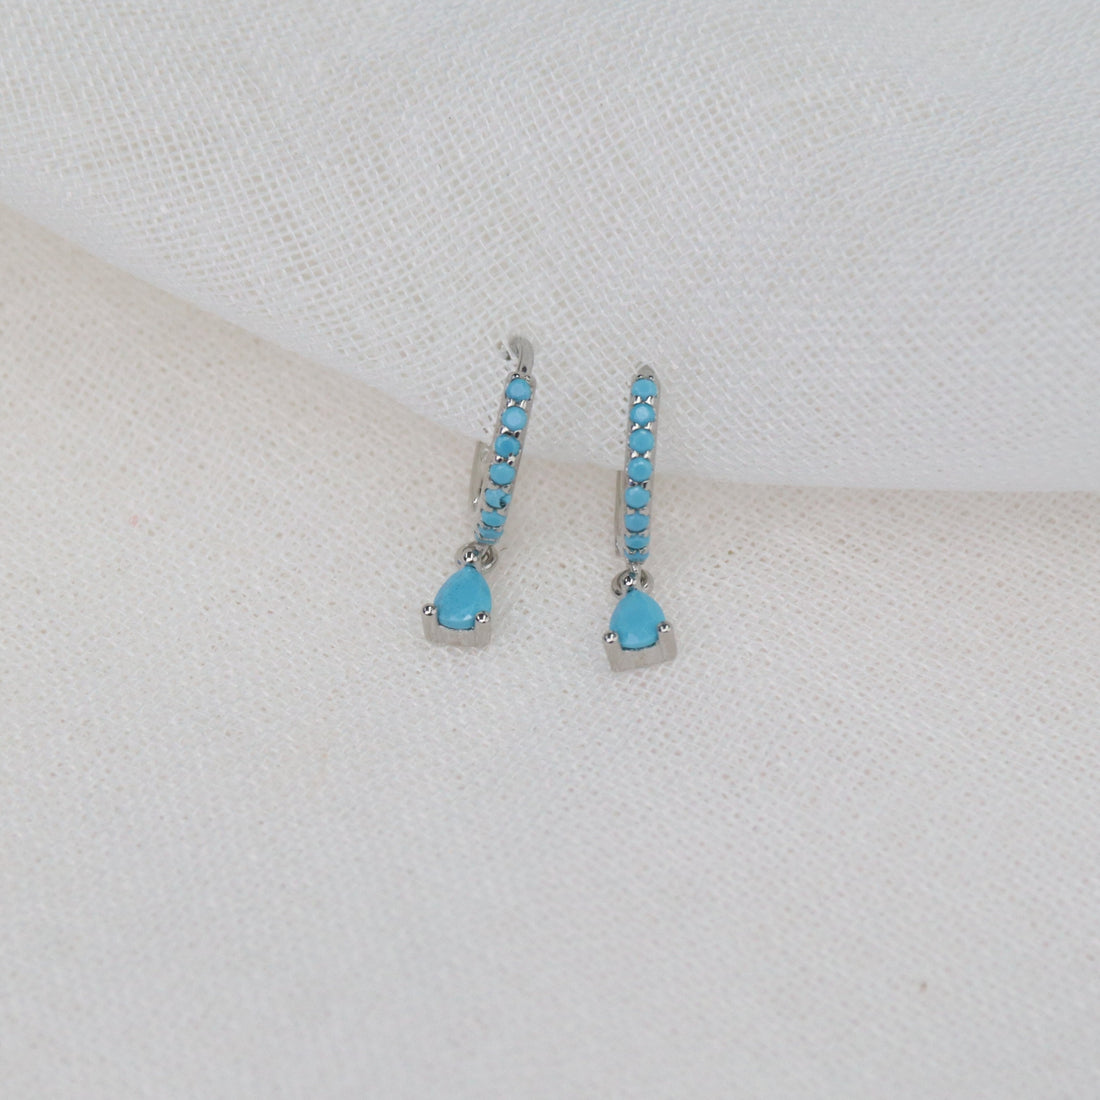 Tash | 18 Gold Plated Sterling Silver Huggies with Turquoise Zircons